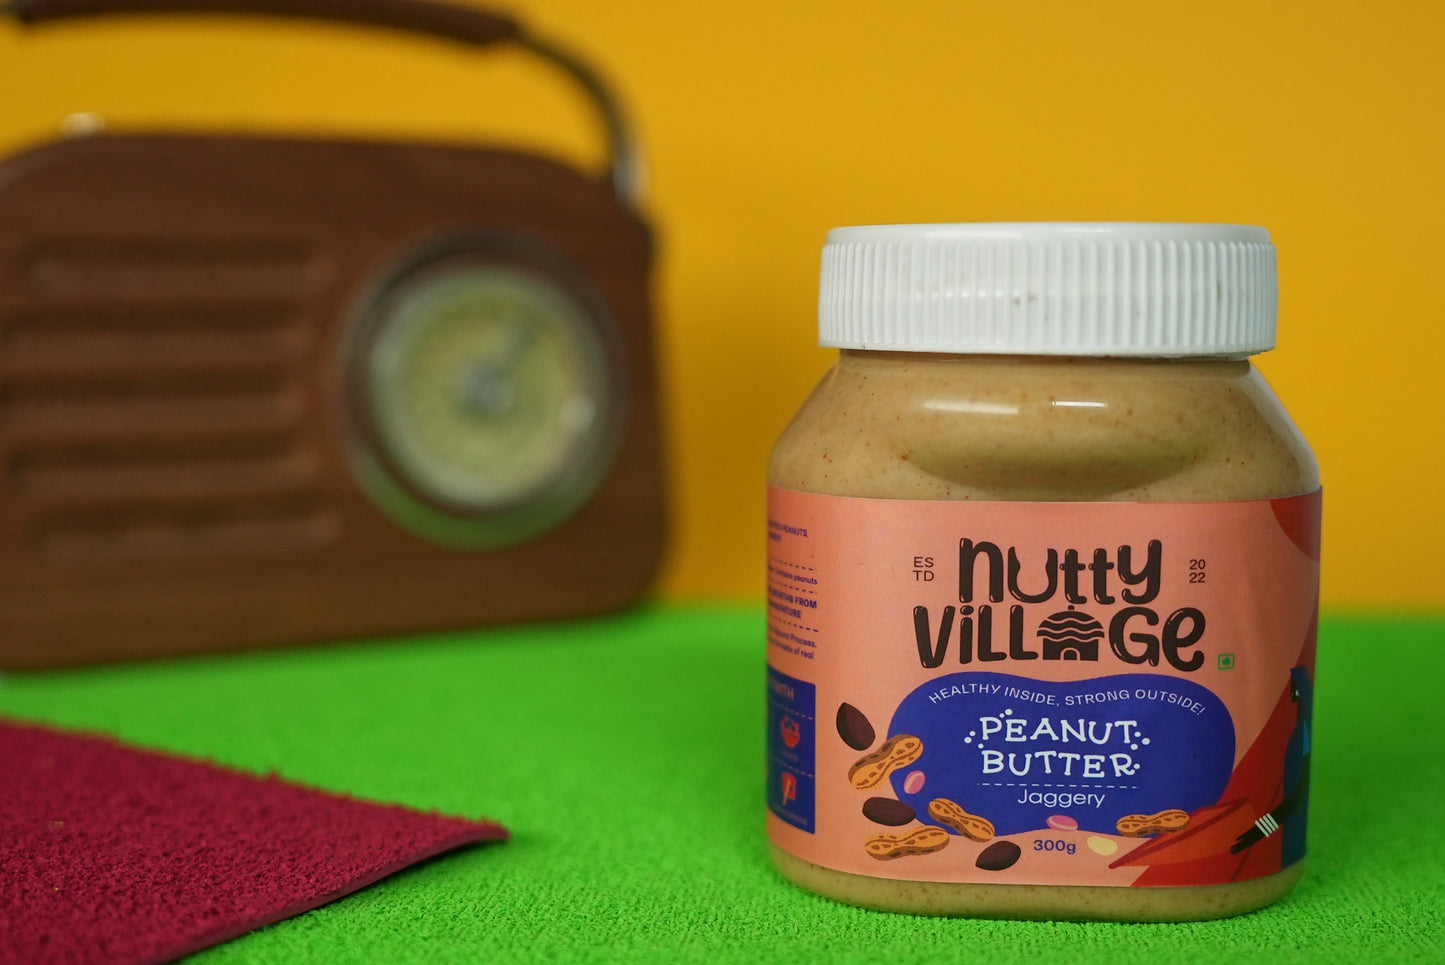 Nutty Village 100% Natural Jaggery Delight Peanut Butter